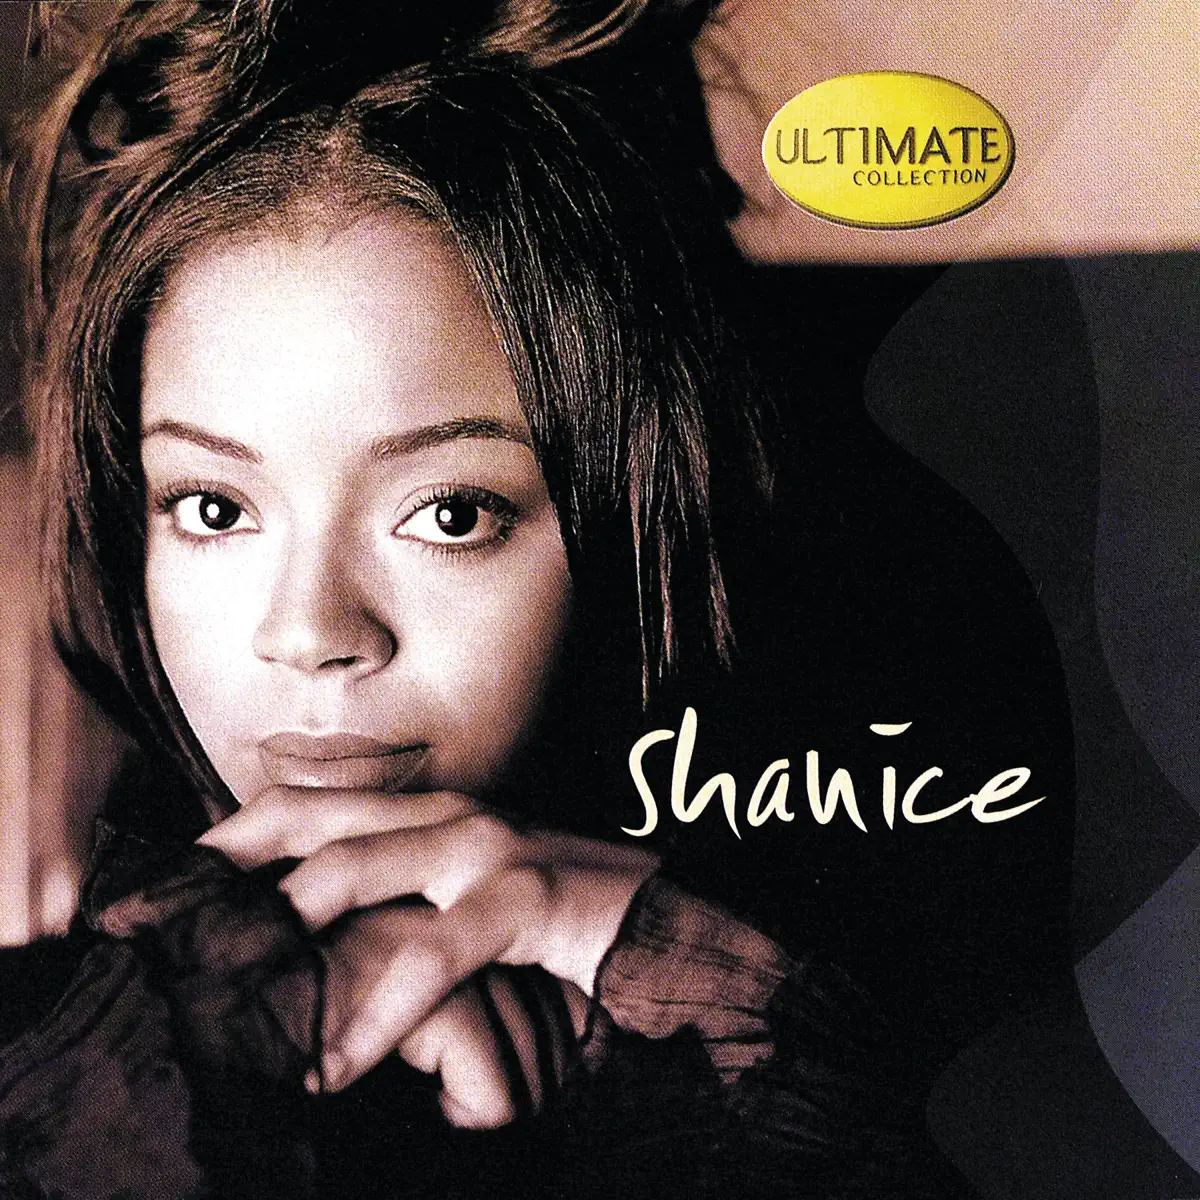 Shanice - Ultimate Collection: Shanice (1999) [iTunes Plus AAC M4A]-新房子